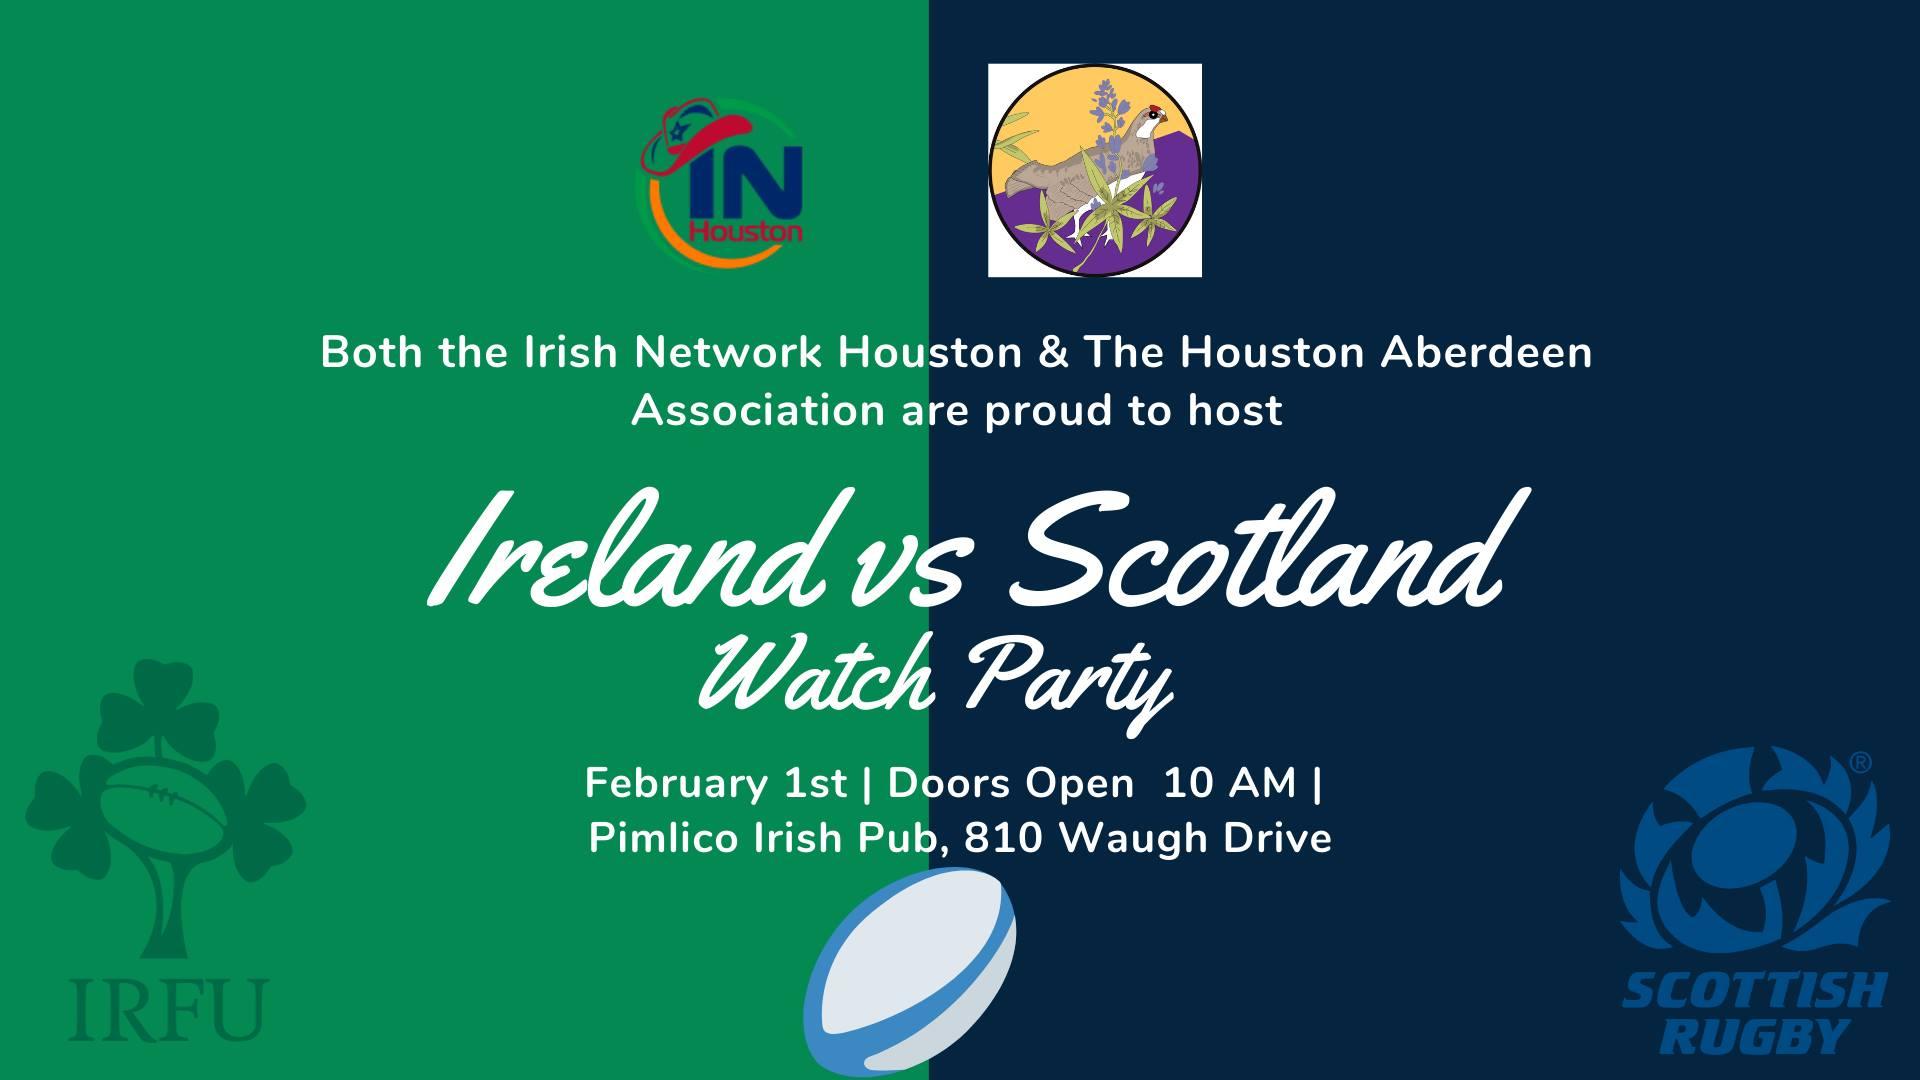 Ireland vs. Scotland Six Nations Rugby Watch Party